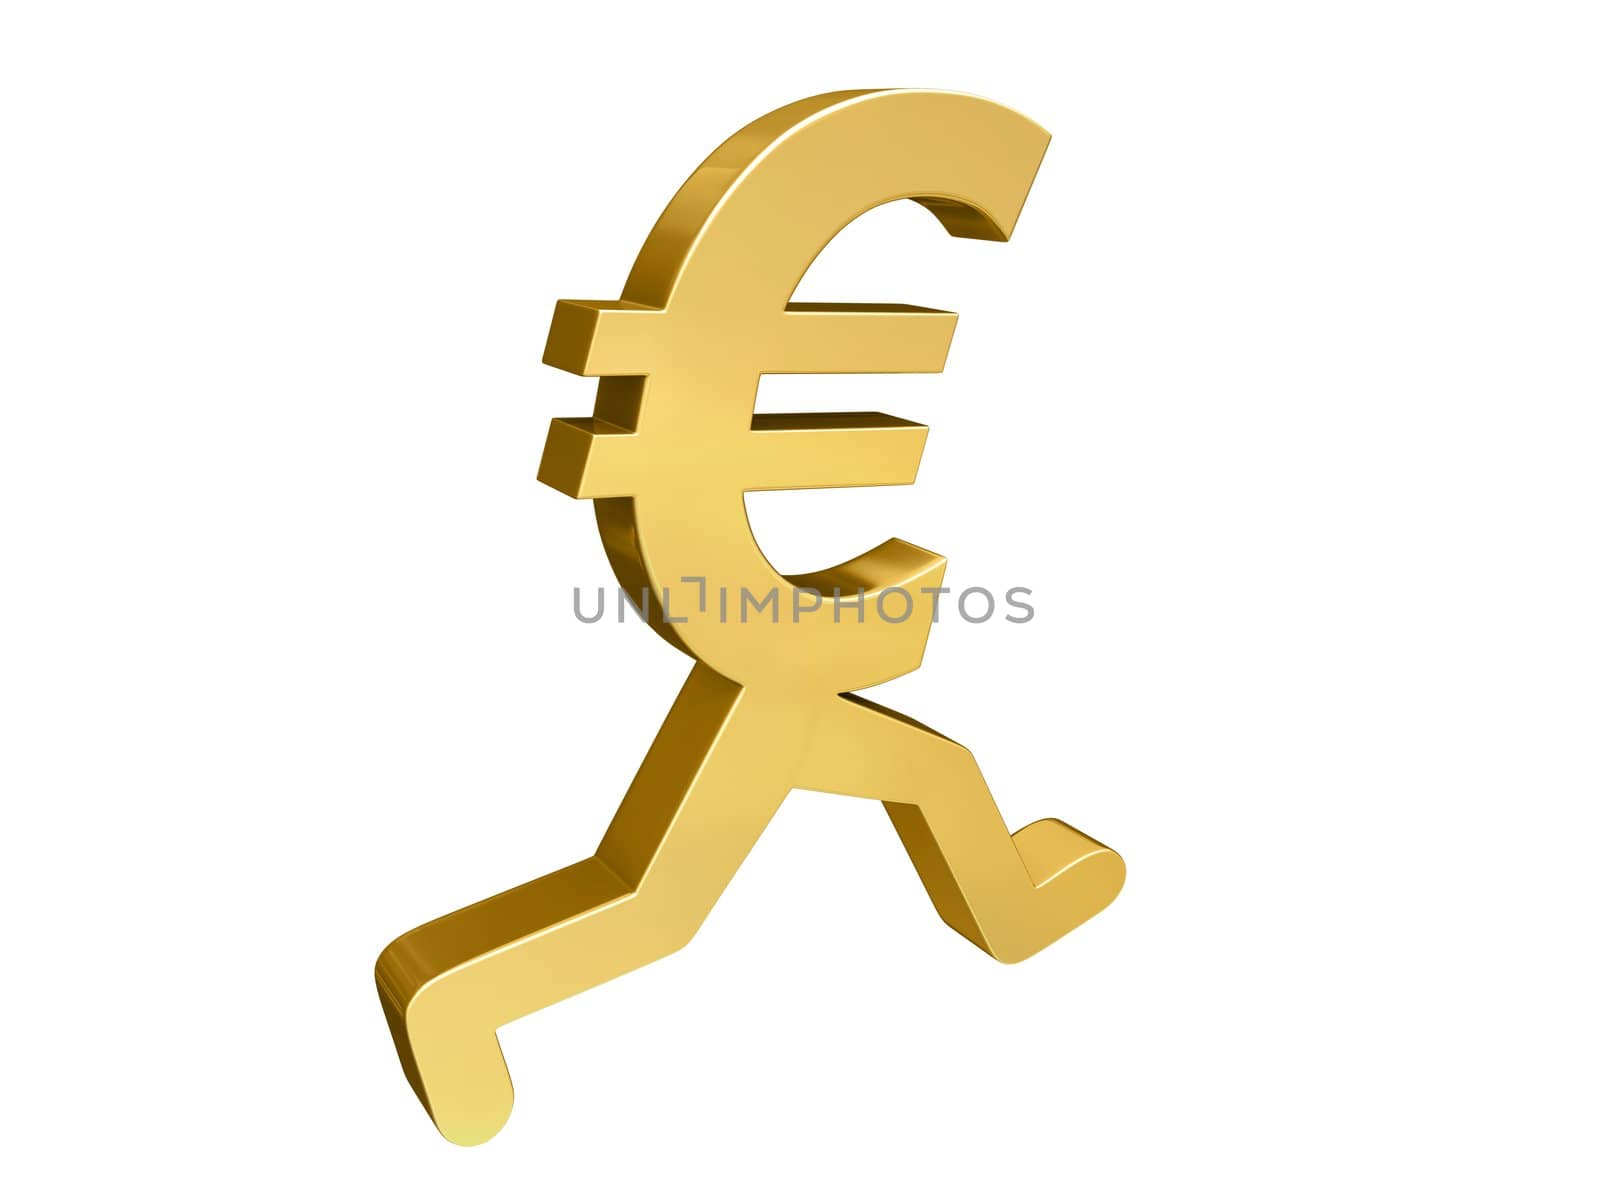 A gold Euro symbol with legs running past the viewer.